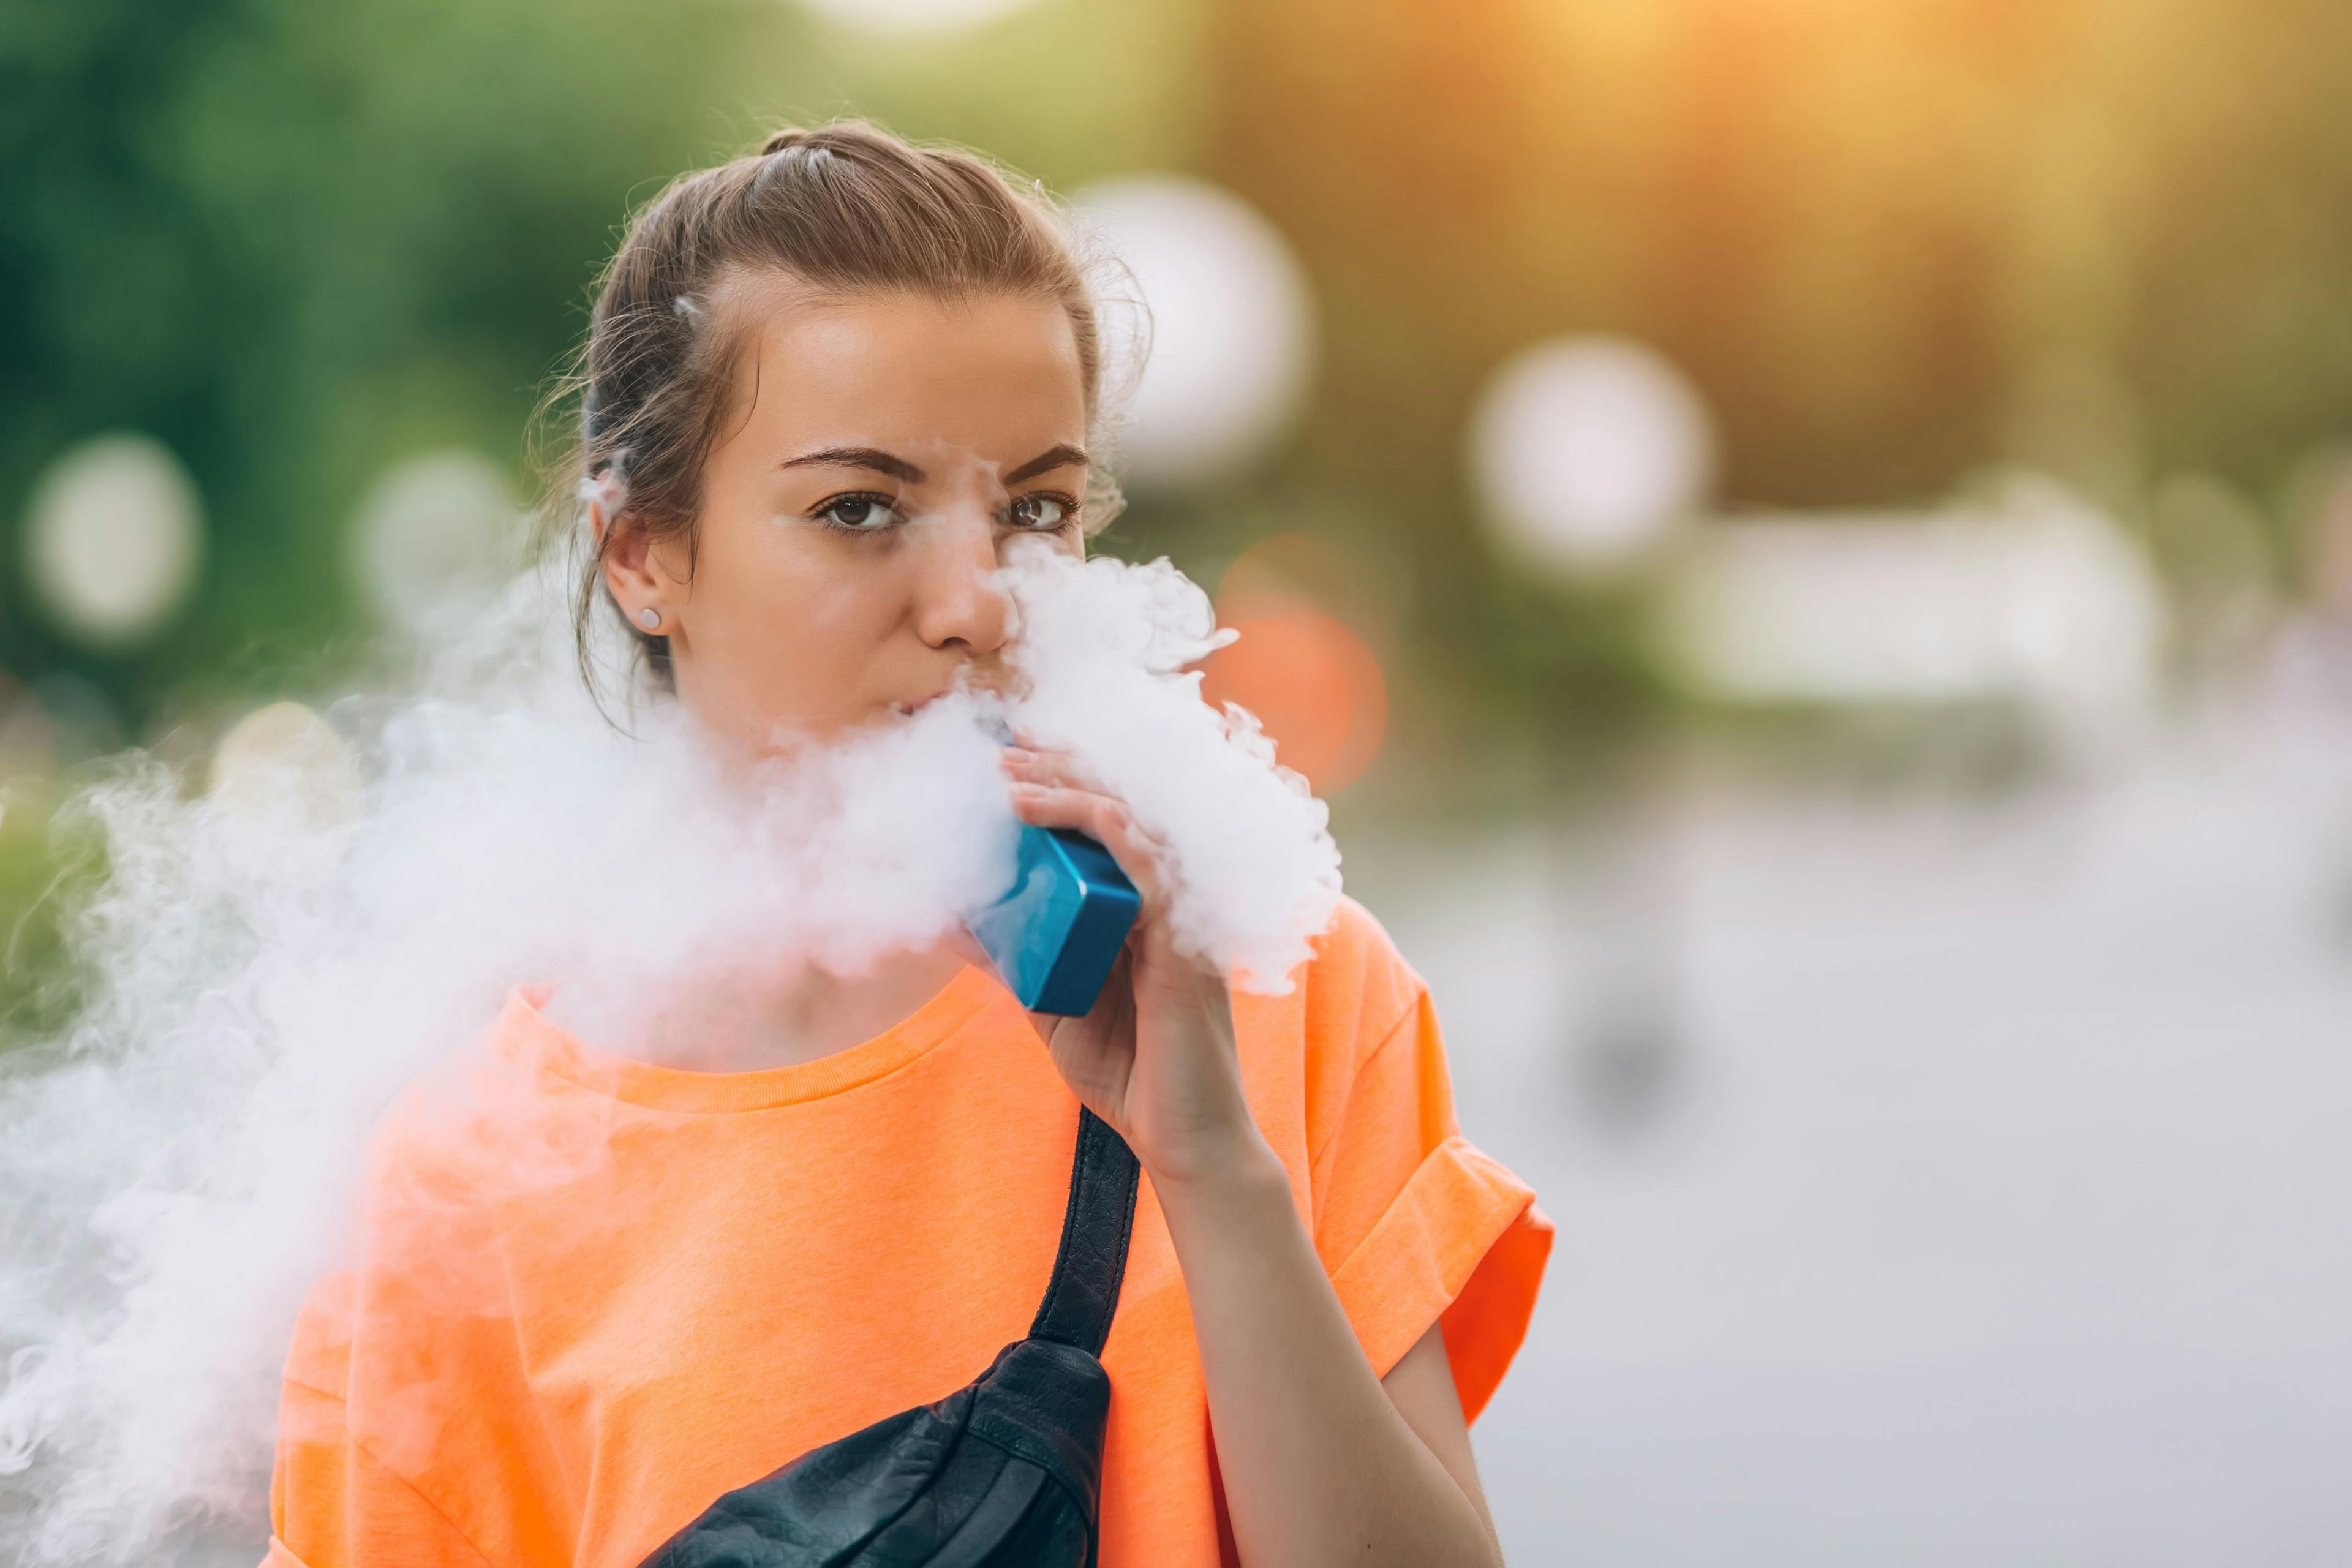 Anti-vaping advertisements effective on youth